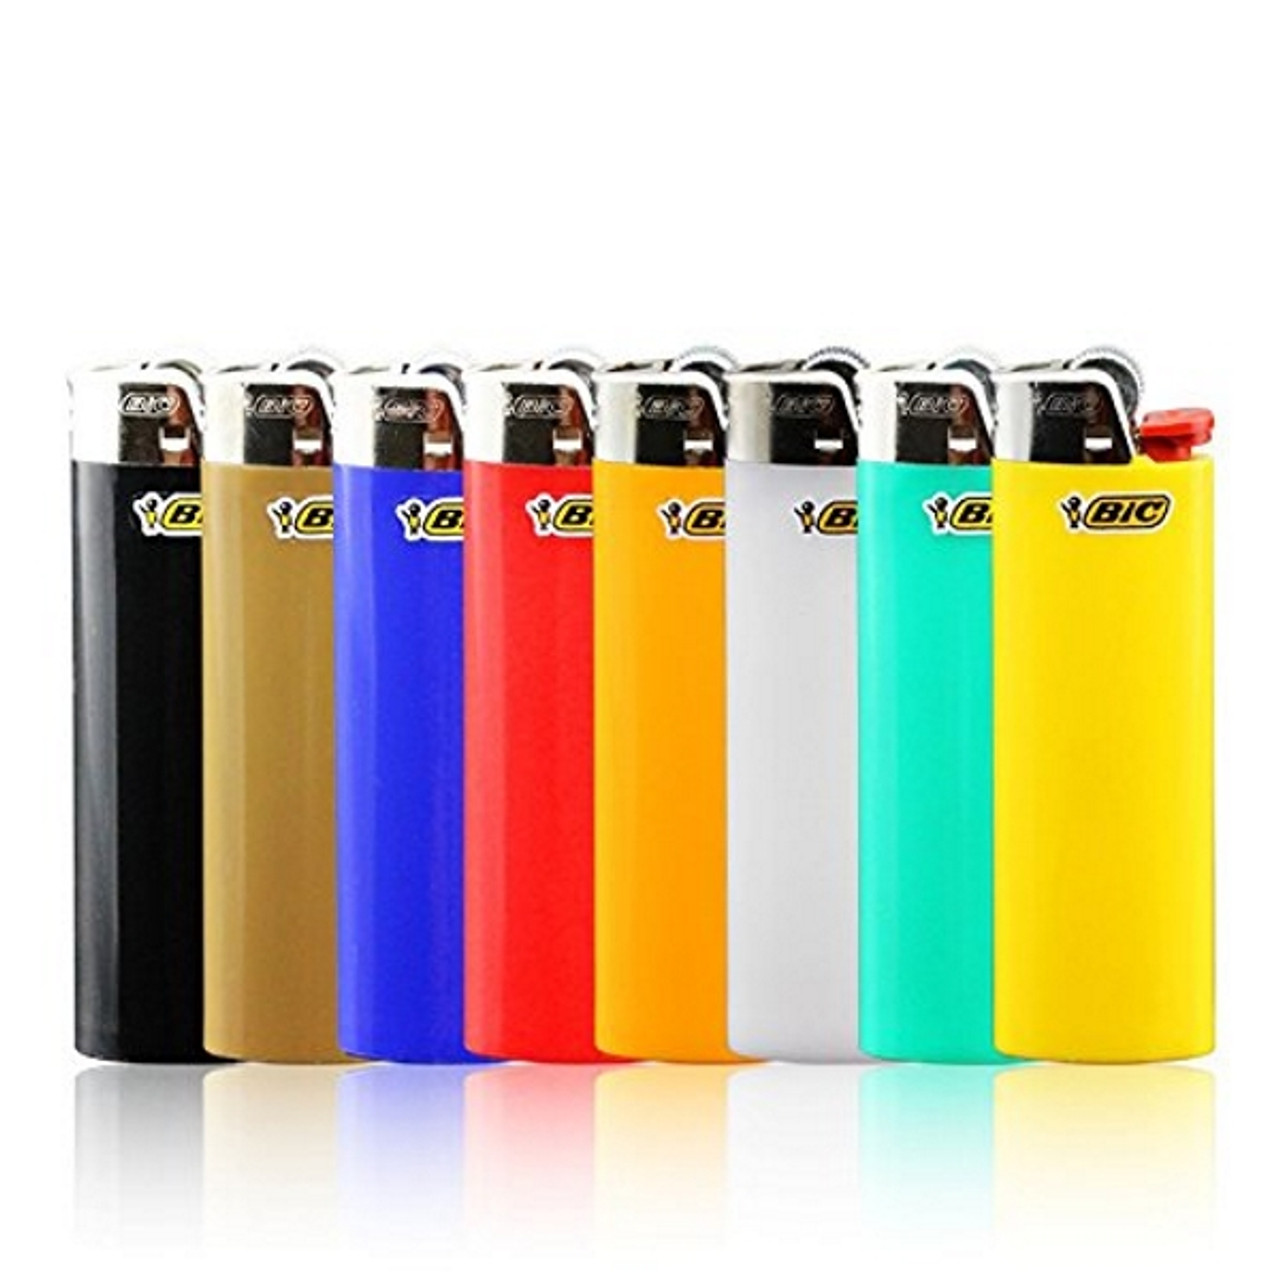 BIC Classic Lighters, Pocket Style, Safe & Child-Resistant